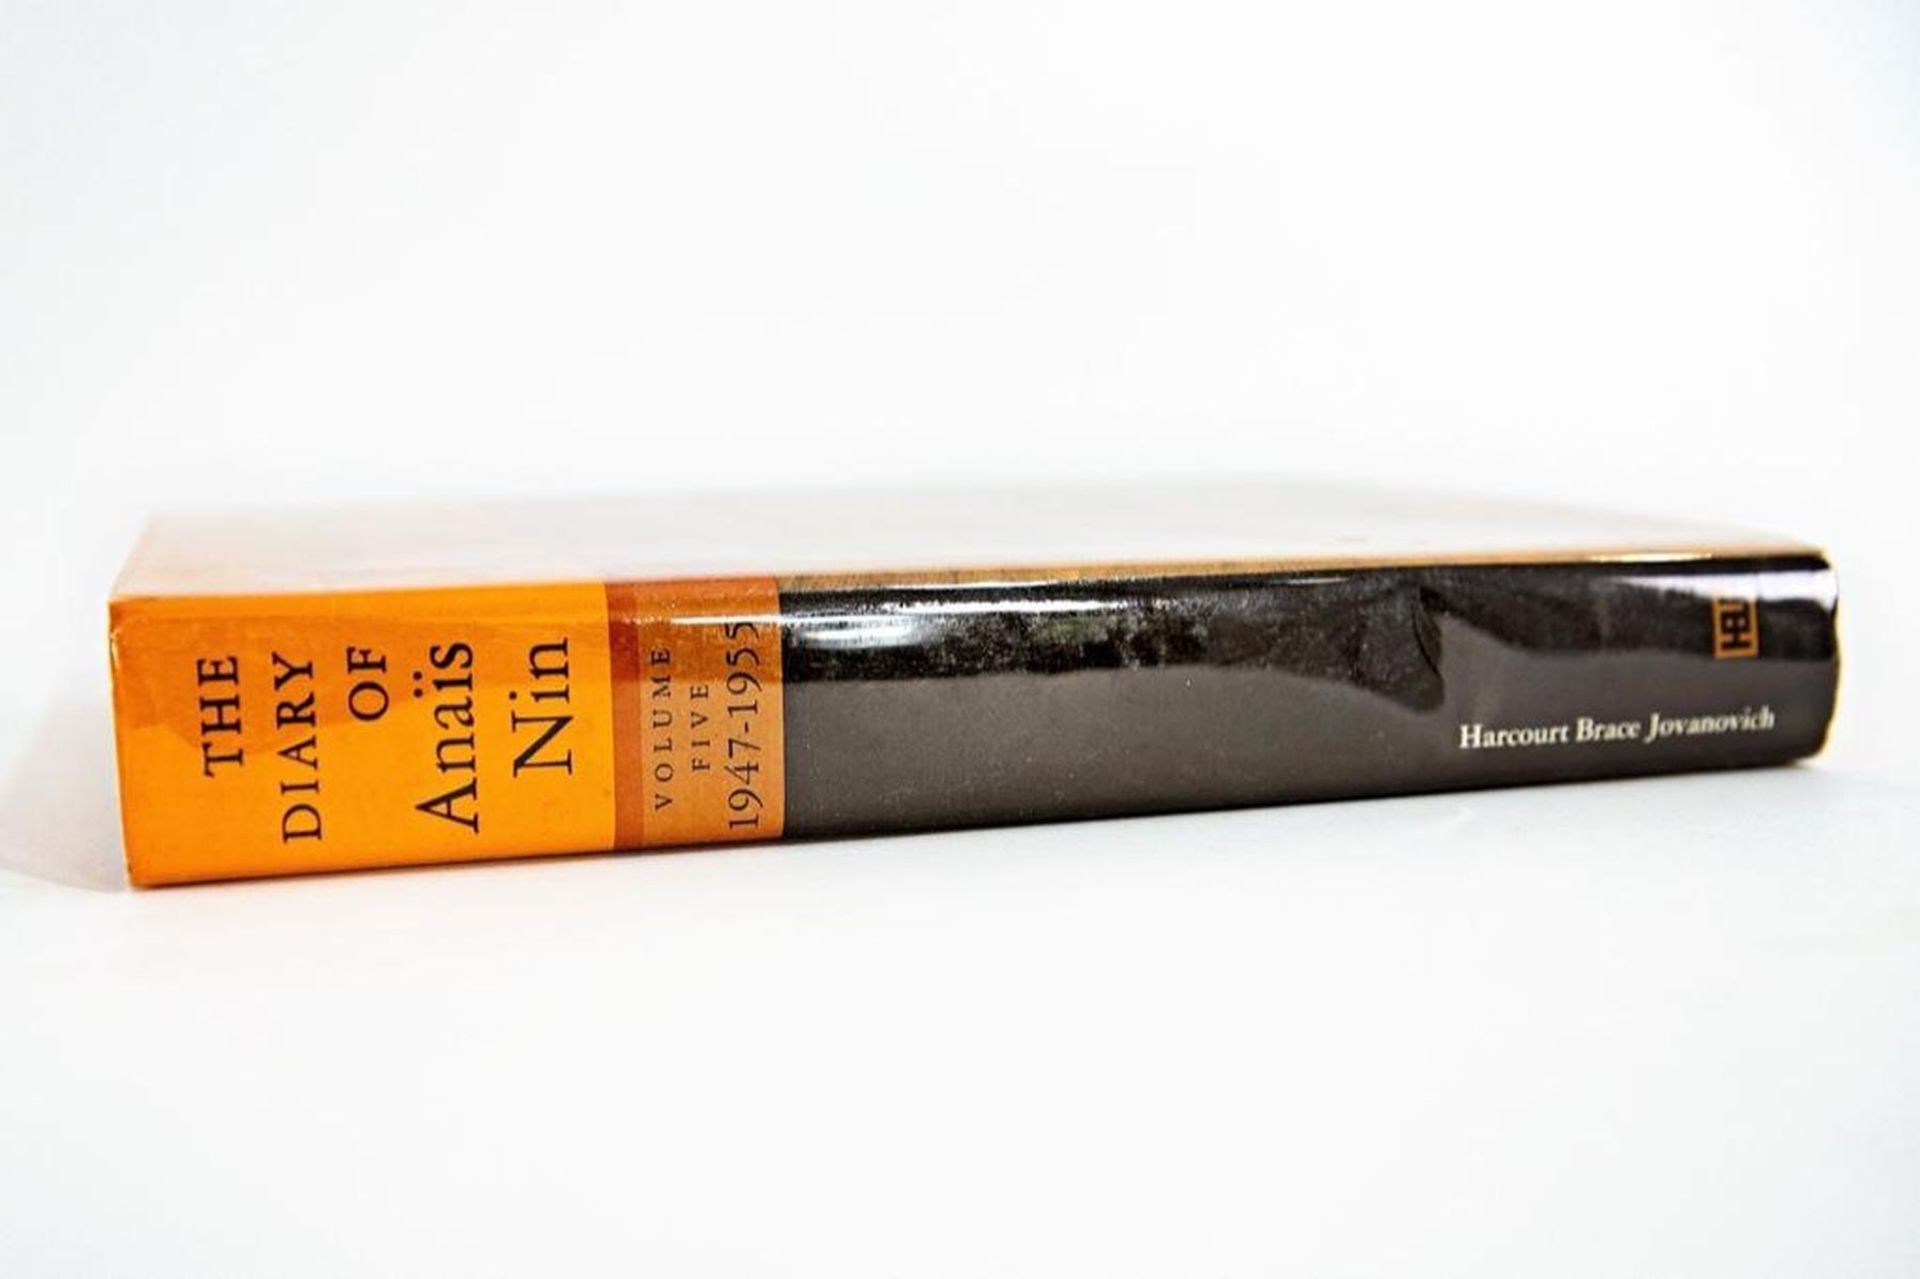 Anais Nin, The Diary of Anais Nin Volume Five- First Edition - Image 2 of 4